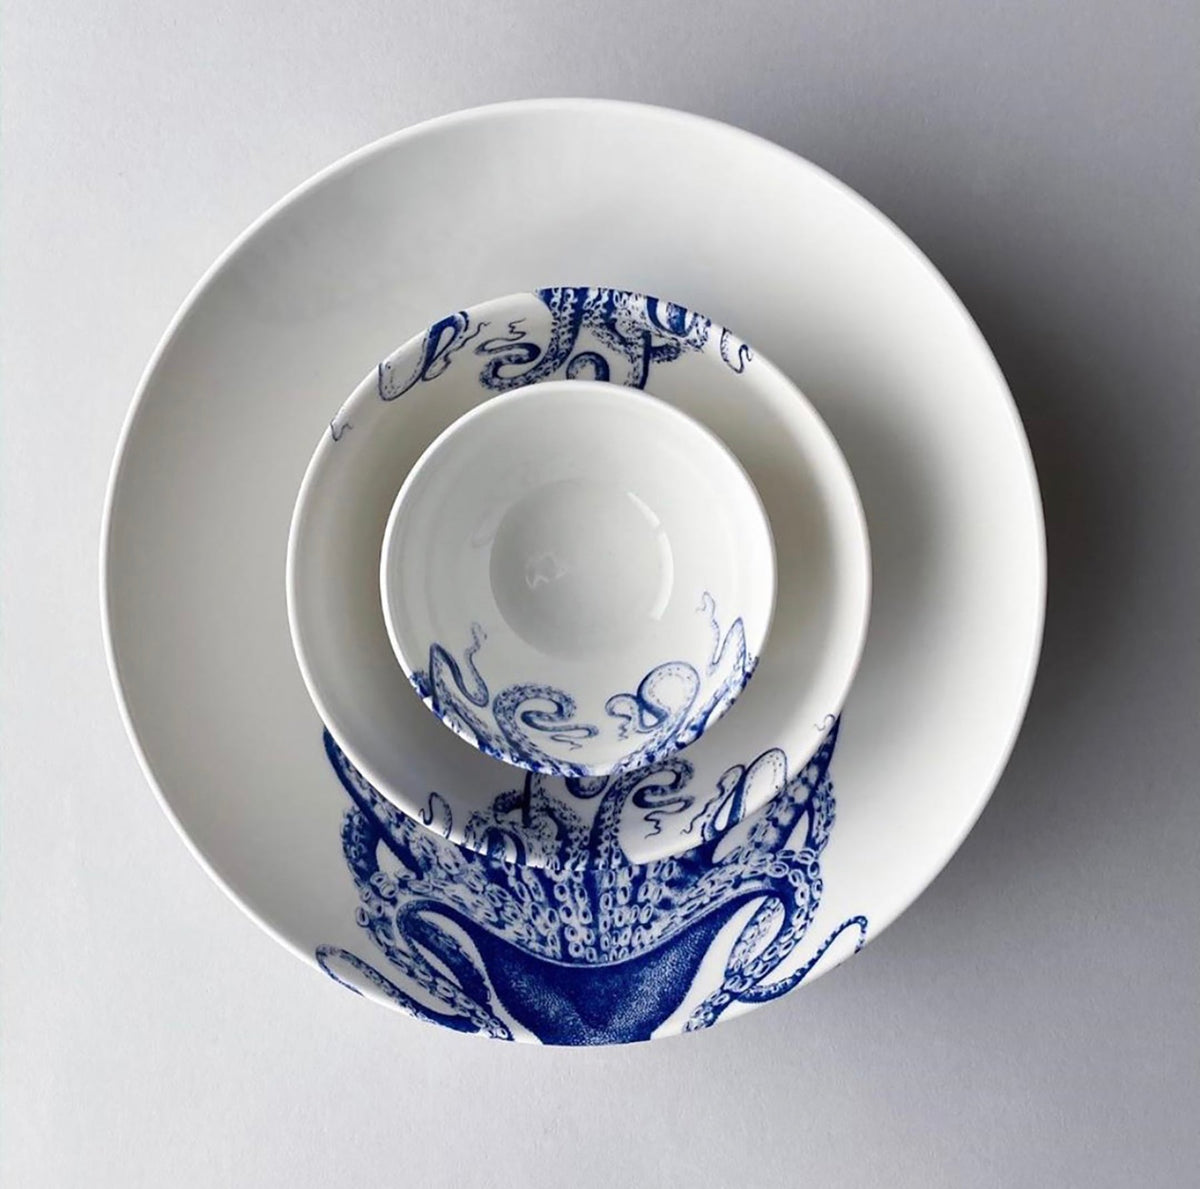 Lucy the octopus, a blue and white porcelain Lucy Wide Serving Bowl by Caskata Artisanal Home.